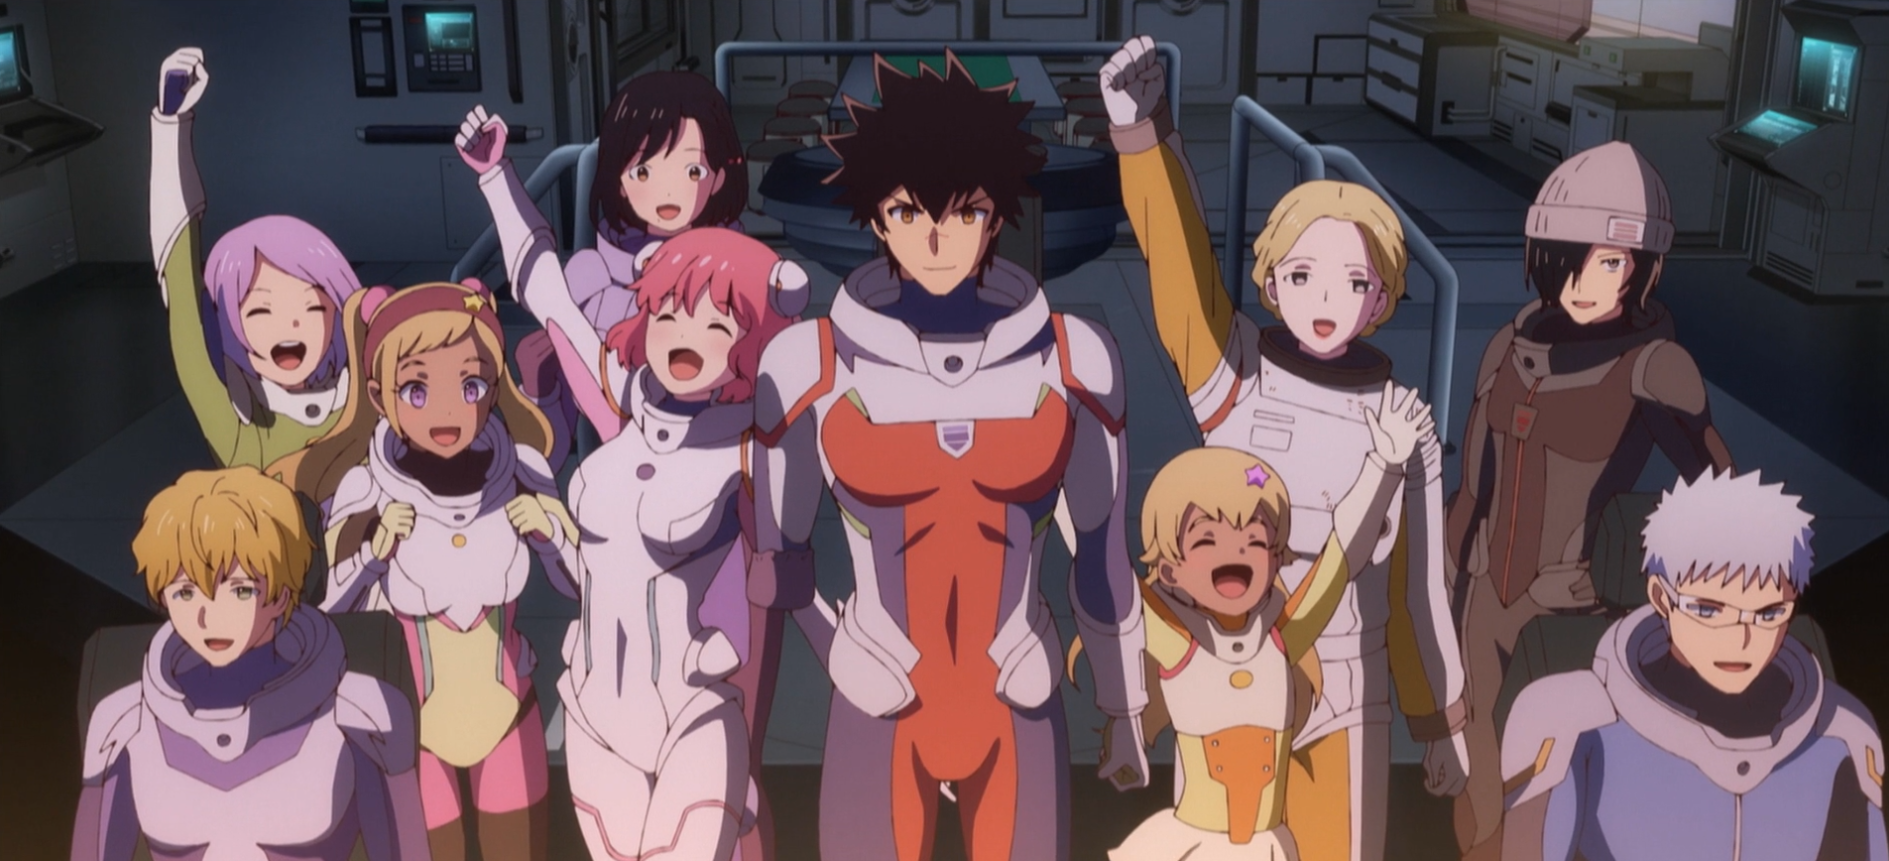 4th Day Of Anime ASTRA LOST IN SPACE - B&B.